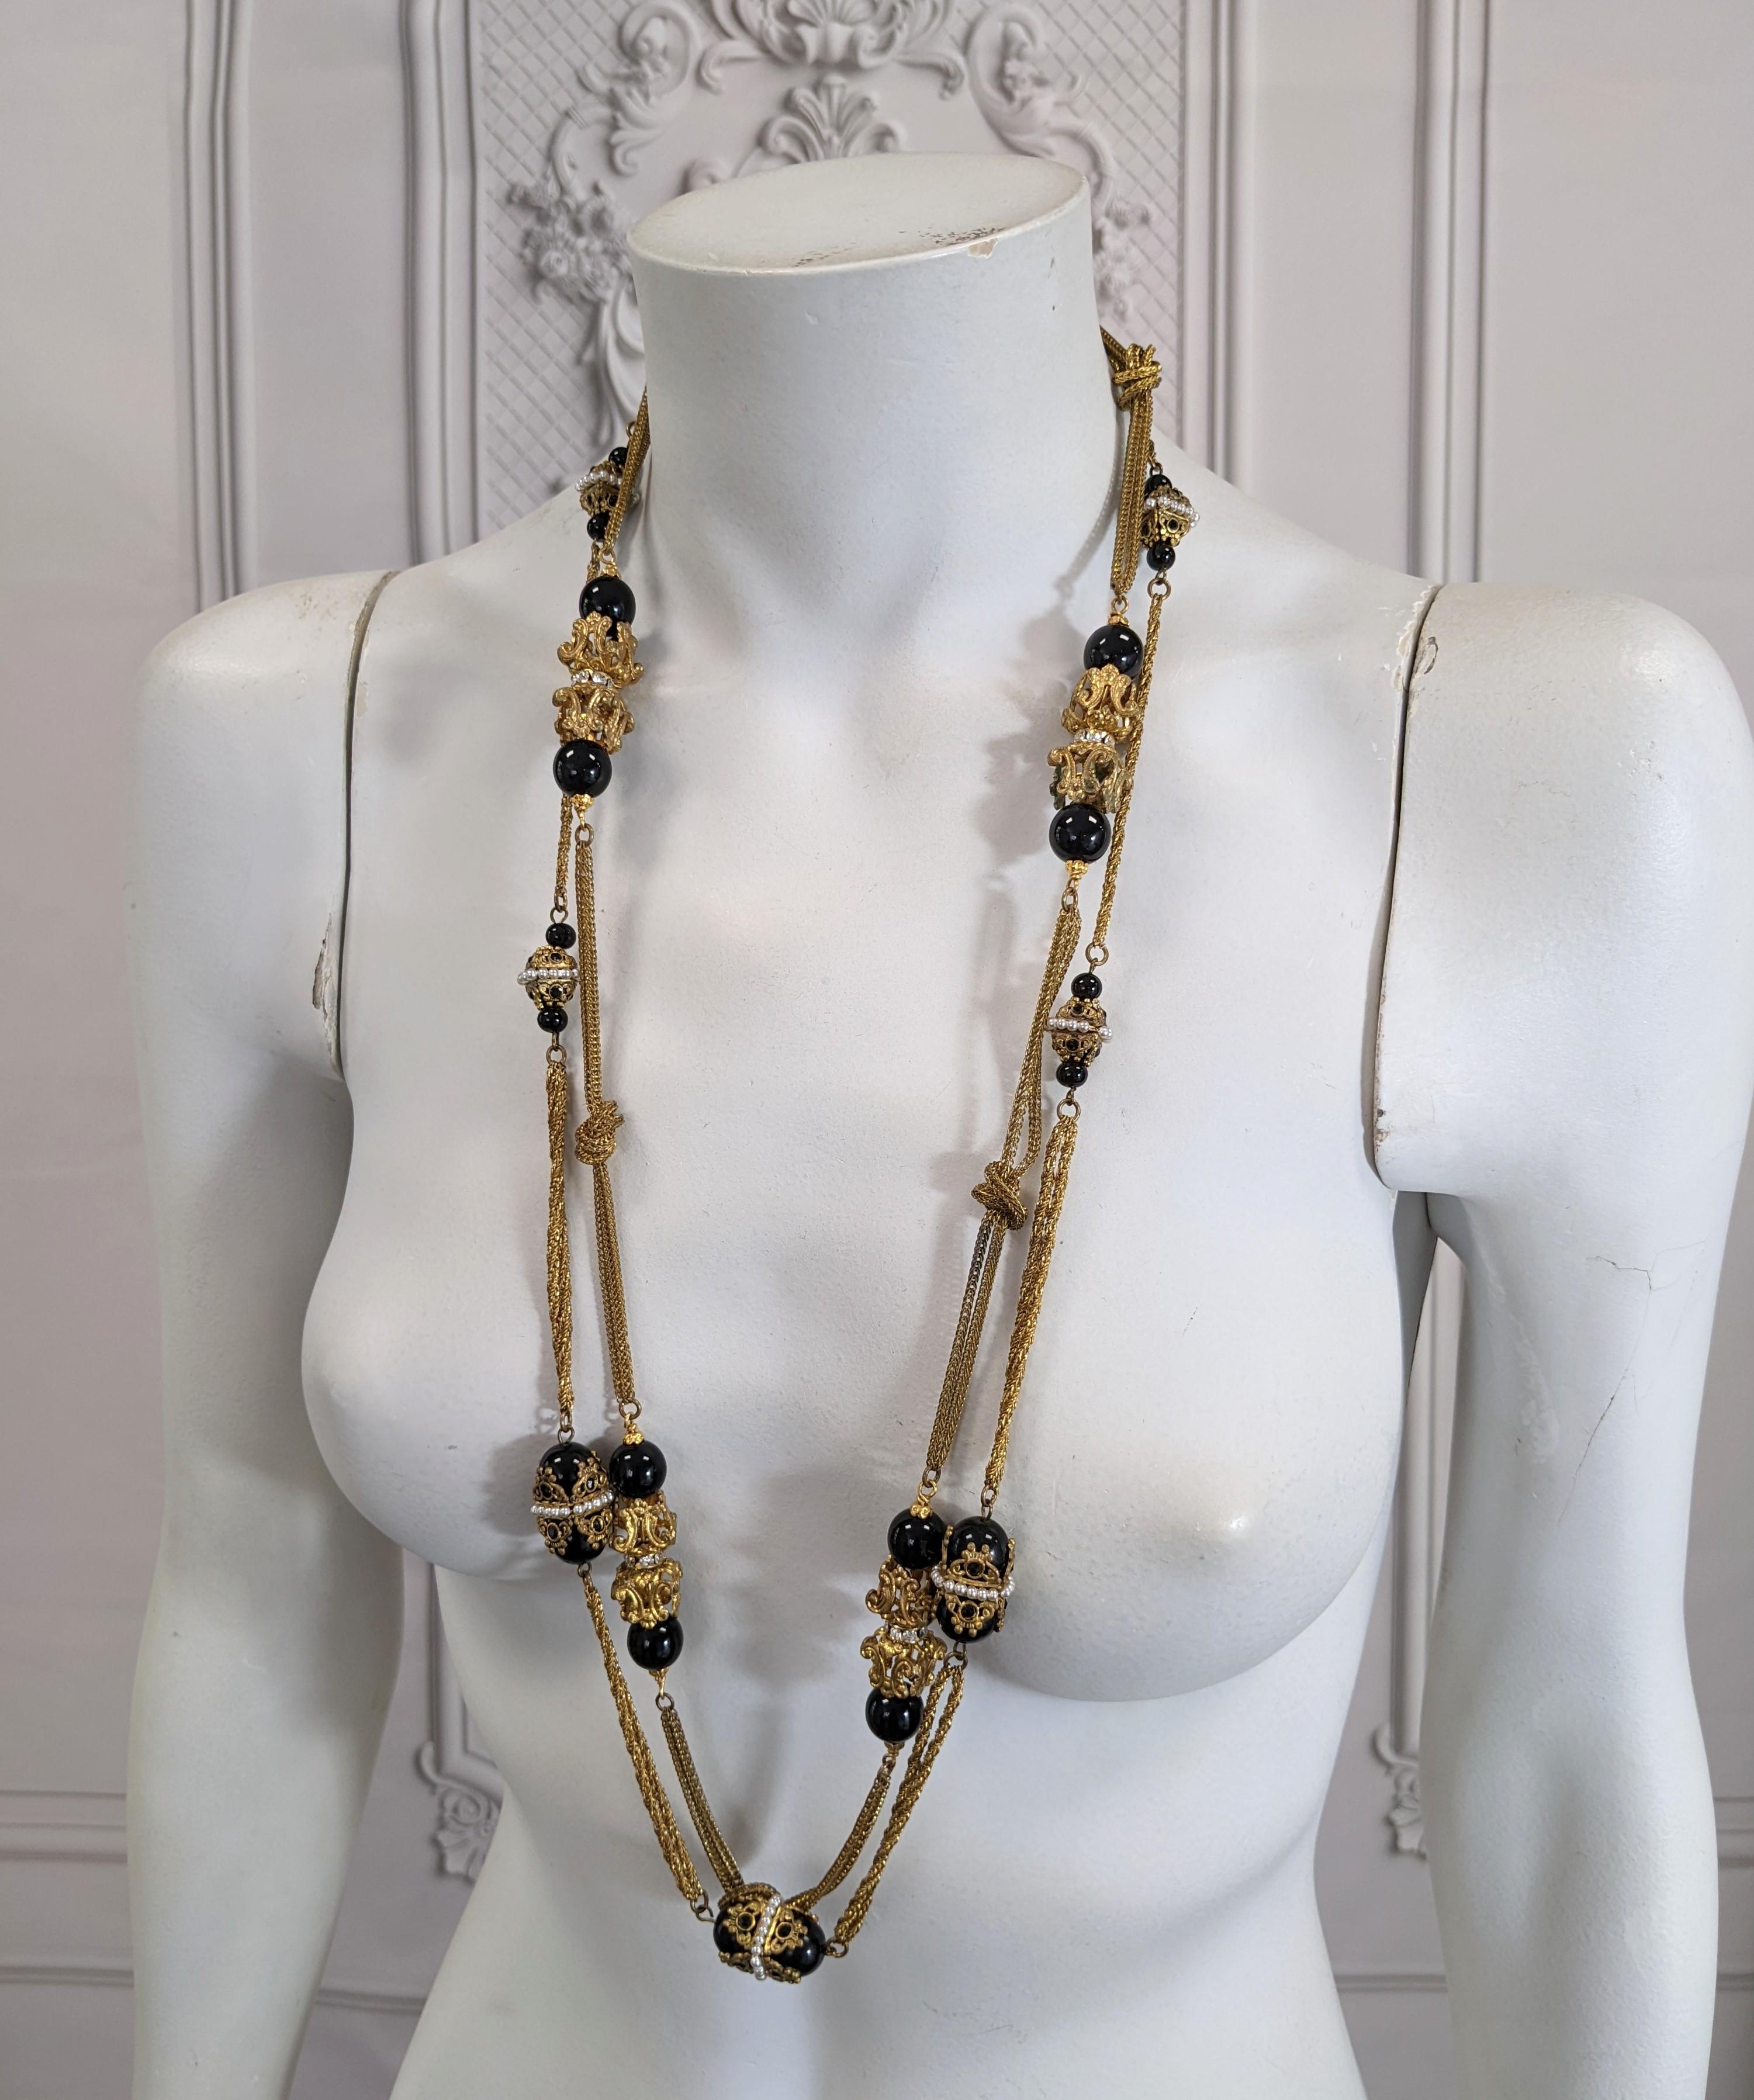 Goossens for Chanel Byzantine Jet and Faux Pearl Sautoir Necklace For Sale 3